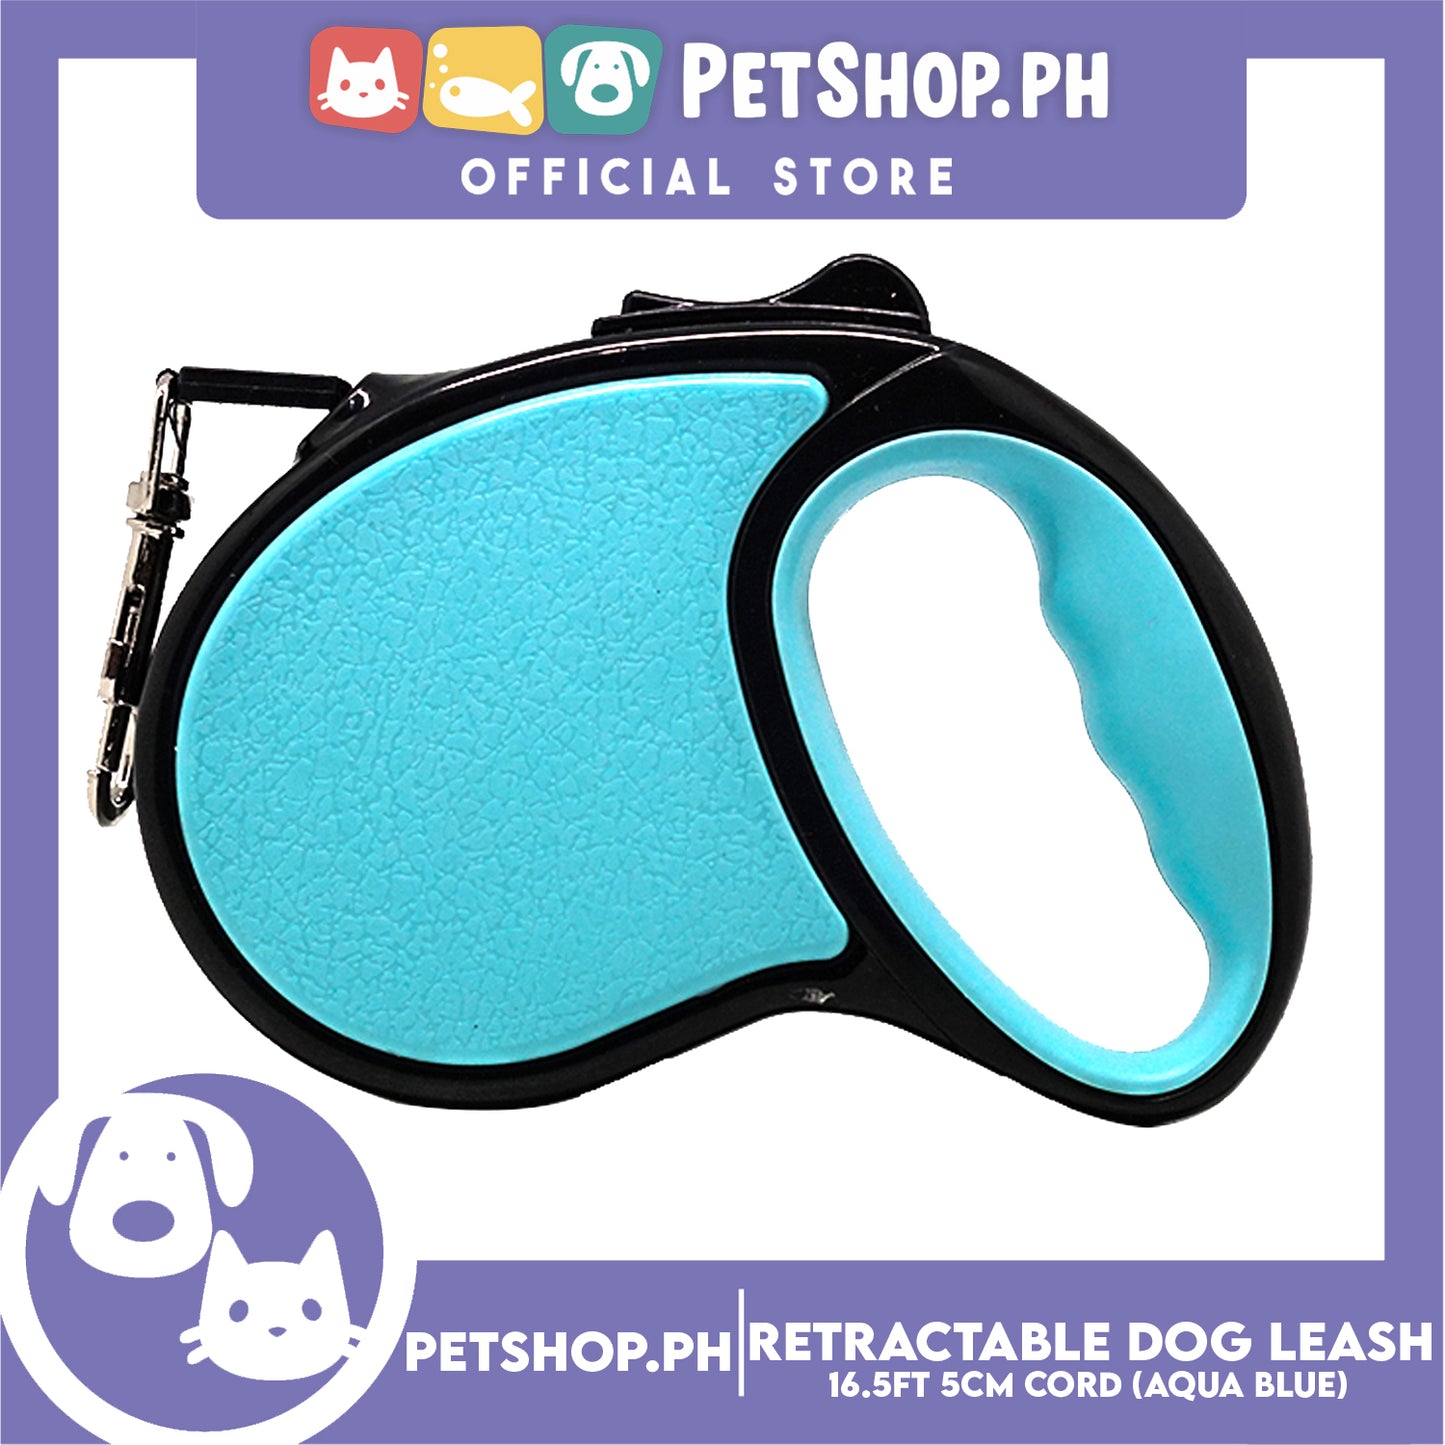 Retractable Dog Leash 16.5ft (5M) Cord with One Button Lock and Release for Up to 33lbs. Dog & Cats (Aqua Blue)